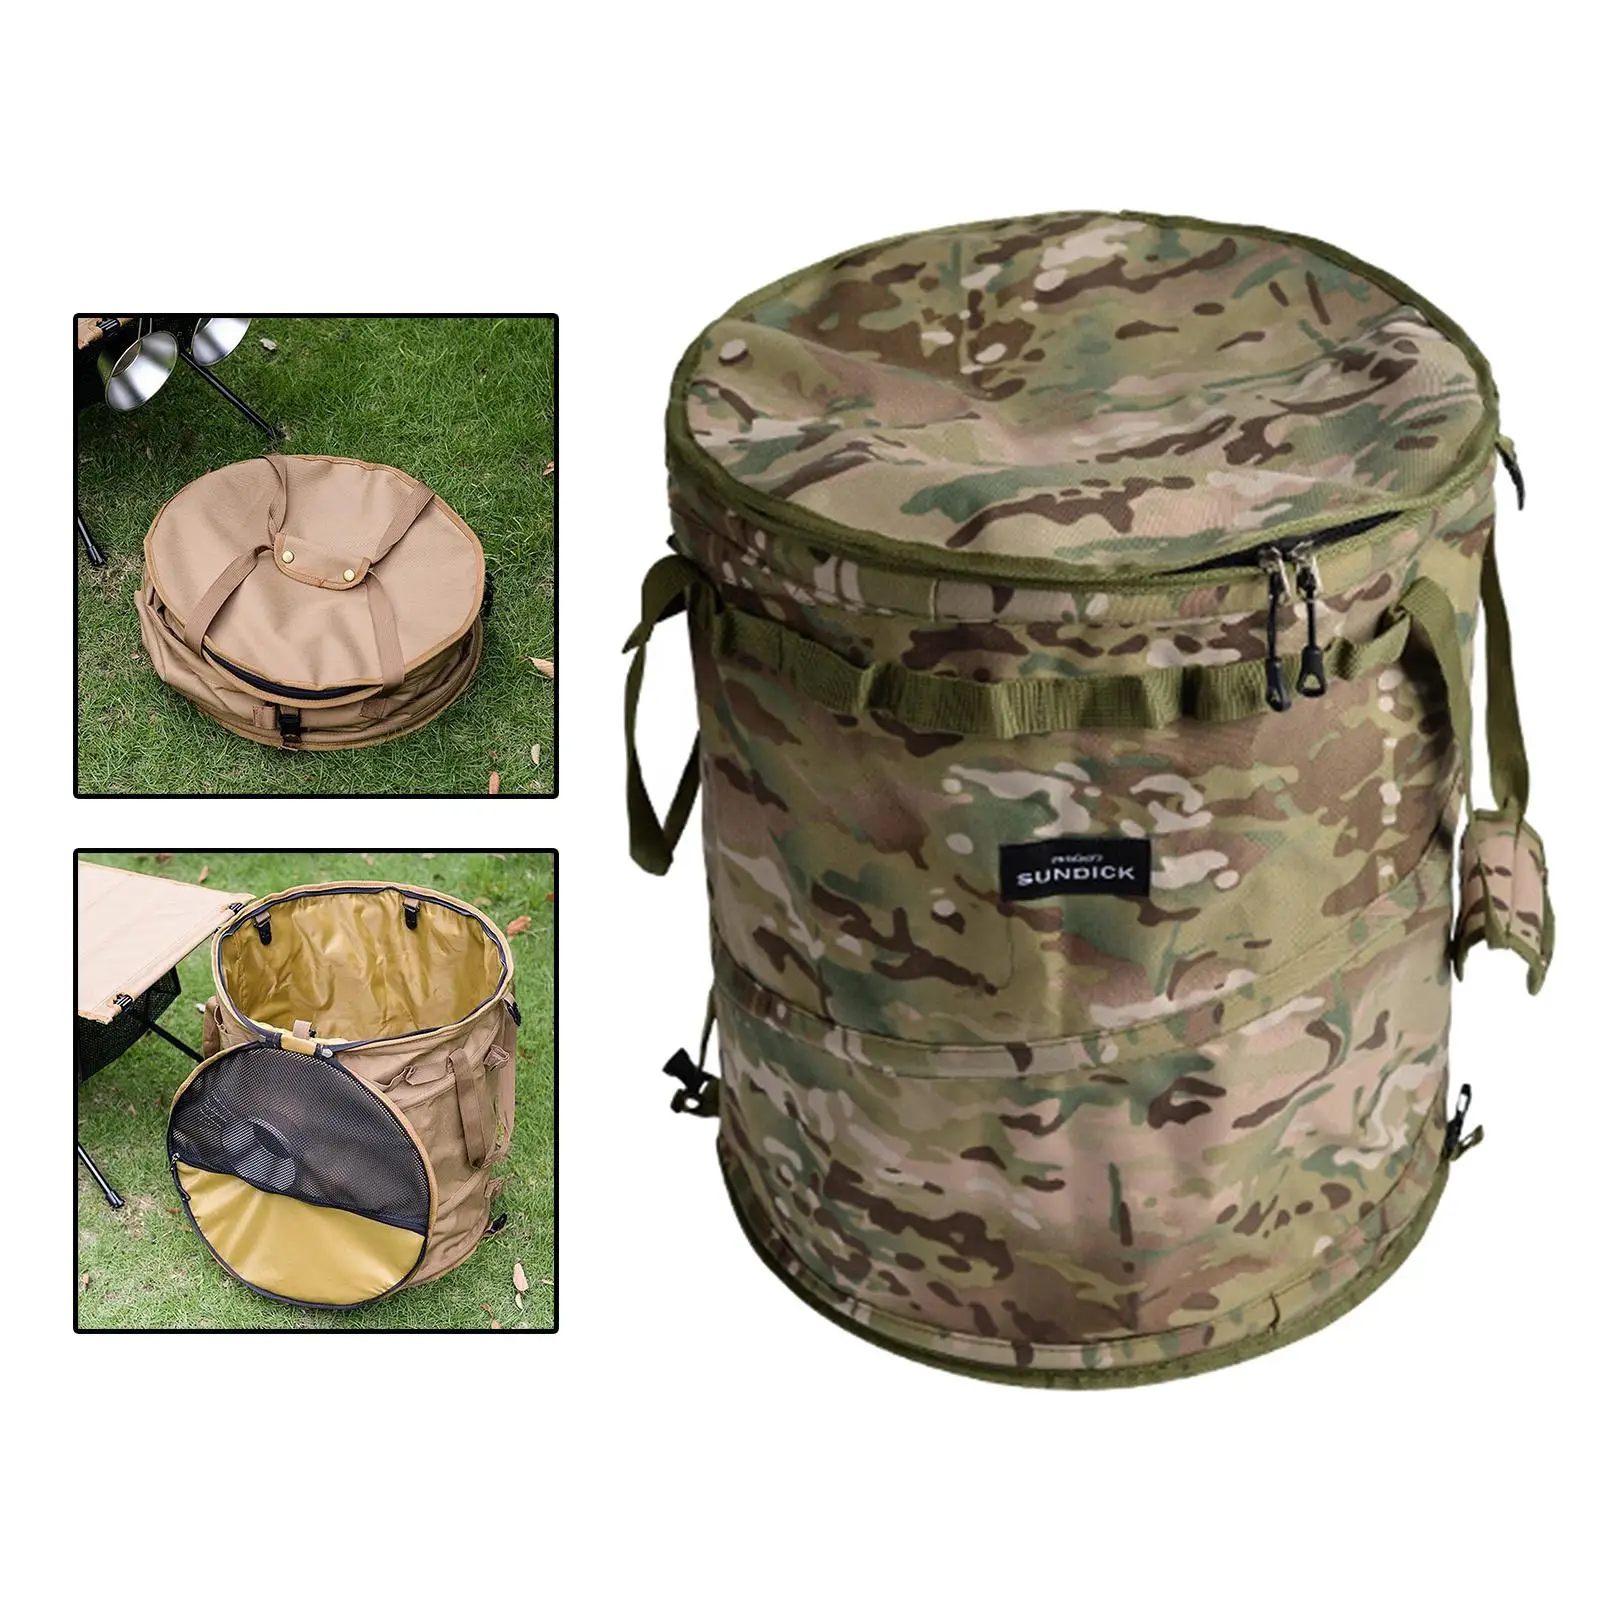 Camping Trash Can Folding Multifunctional with Clips 13 Gallon for Picnic